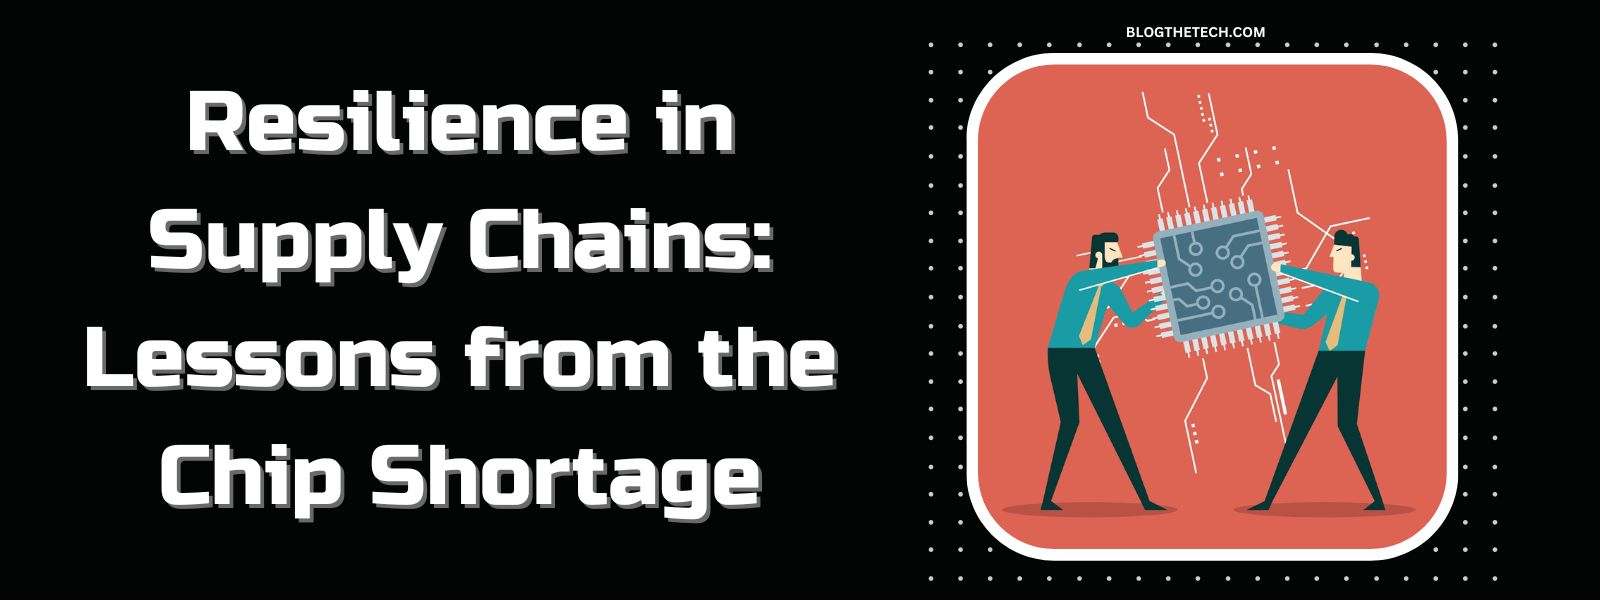 Resilience in Supply Chains: Lessons from the Chip Shortage